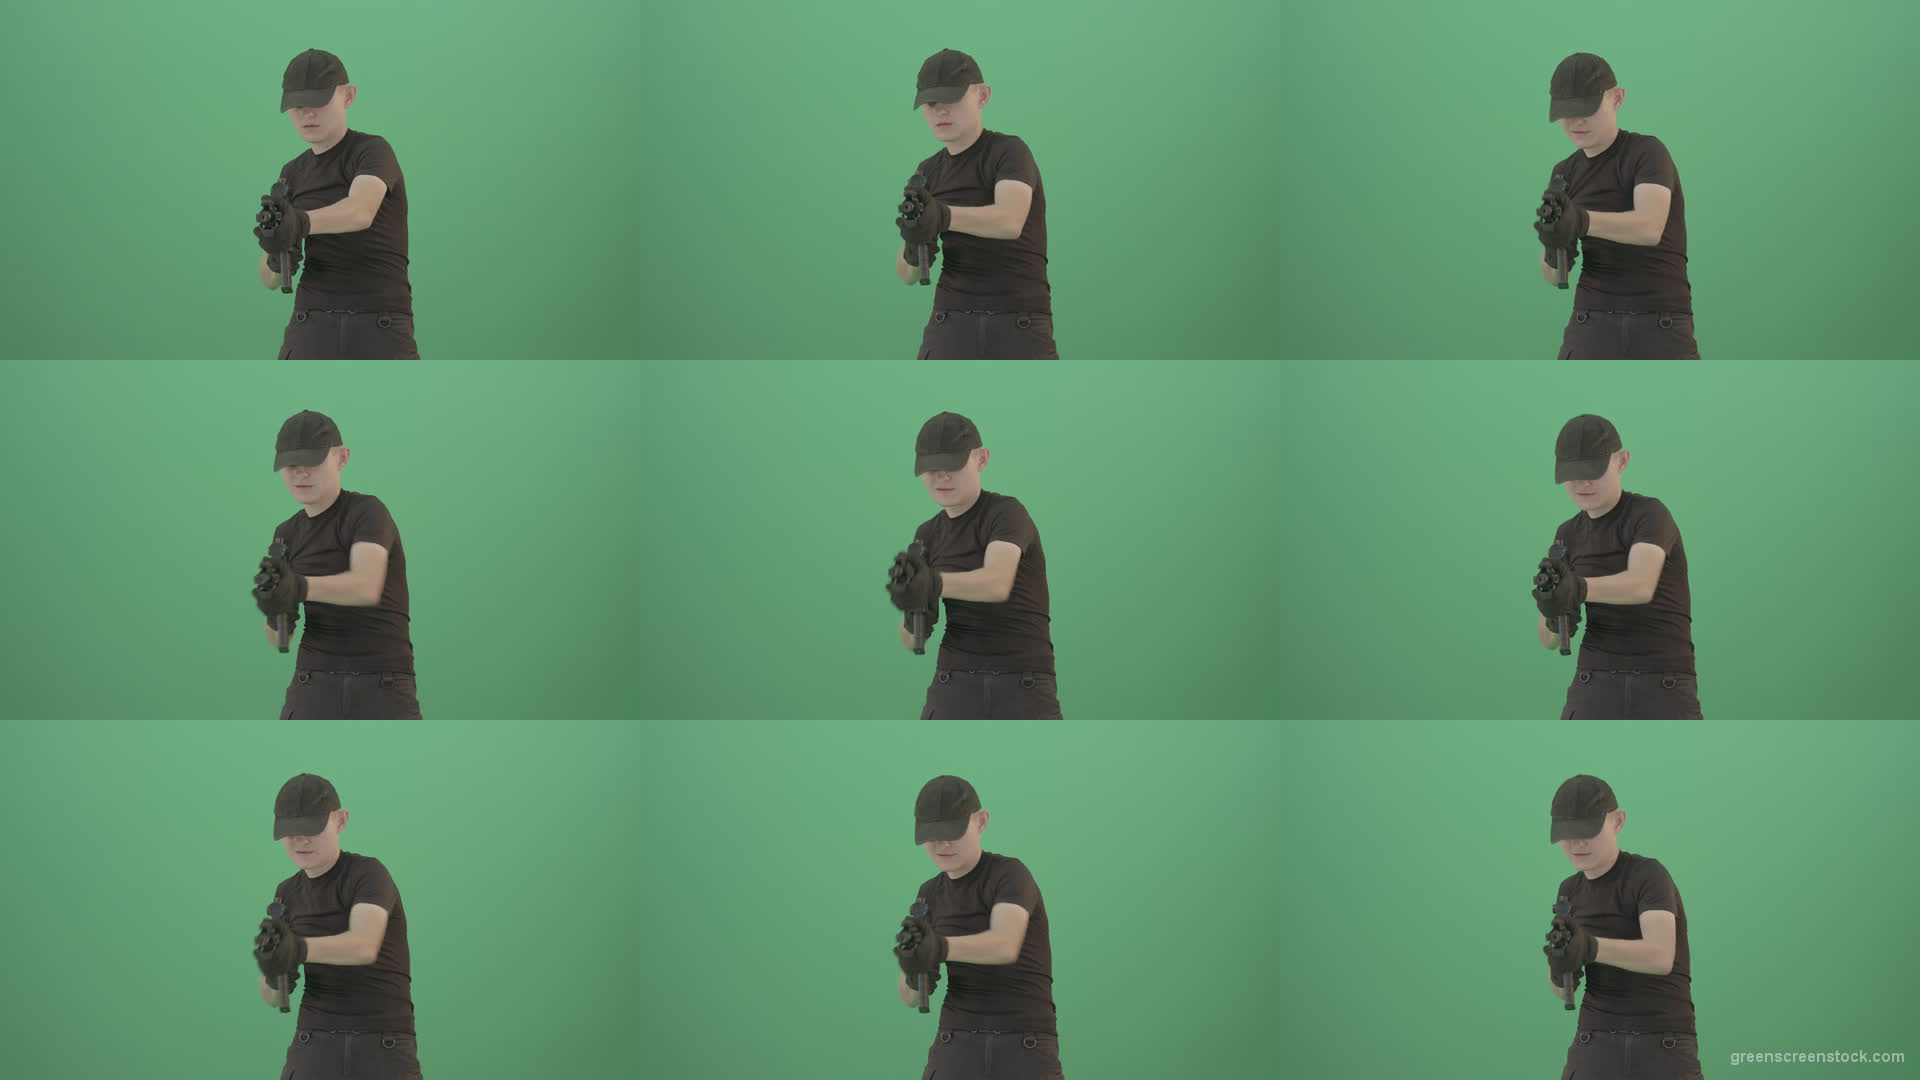 Funny-Small-boy-terrorist-shooting-enemies-from-machine-gun-isolated-on-green-screen-4K-Video-Footage-1920 Green Screen Stock